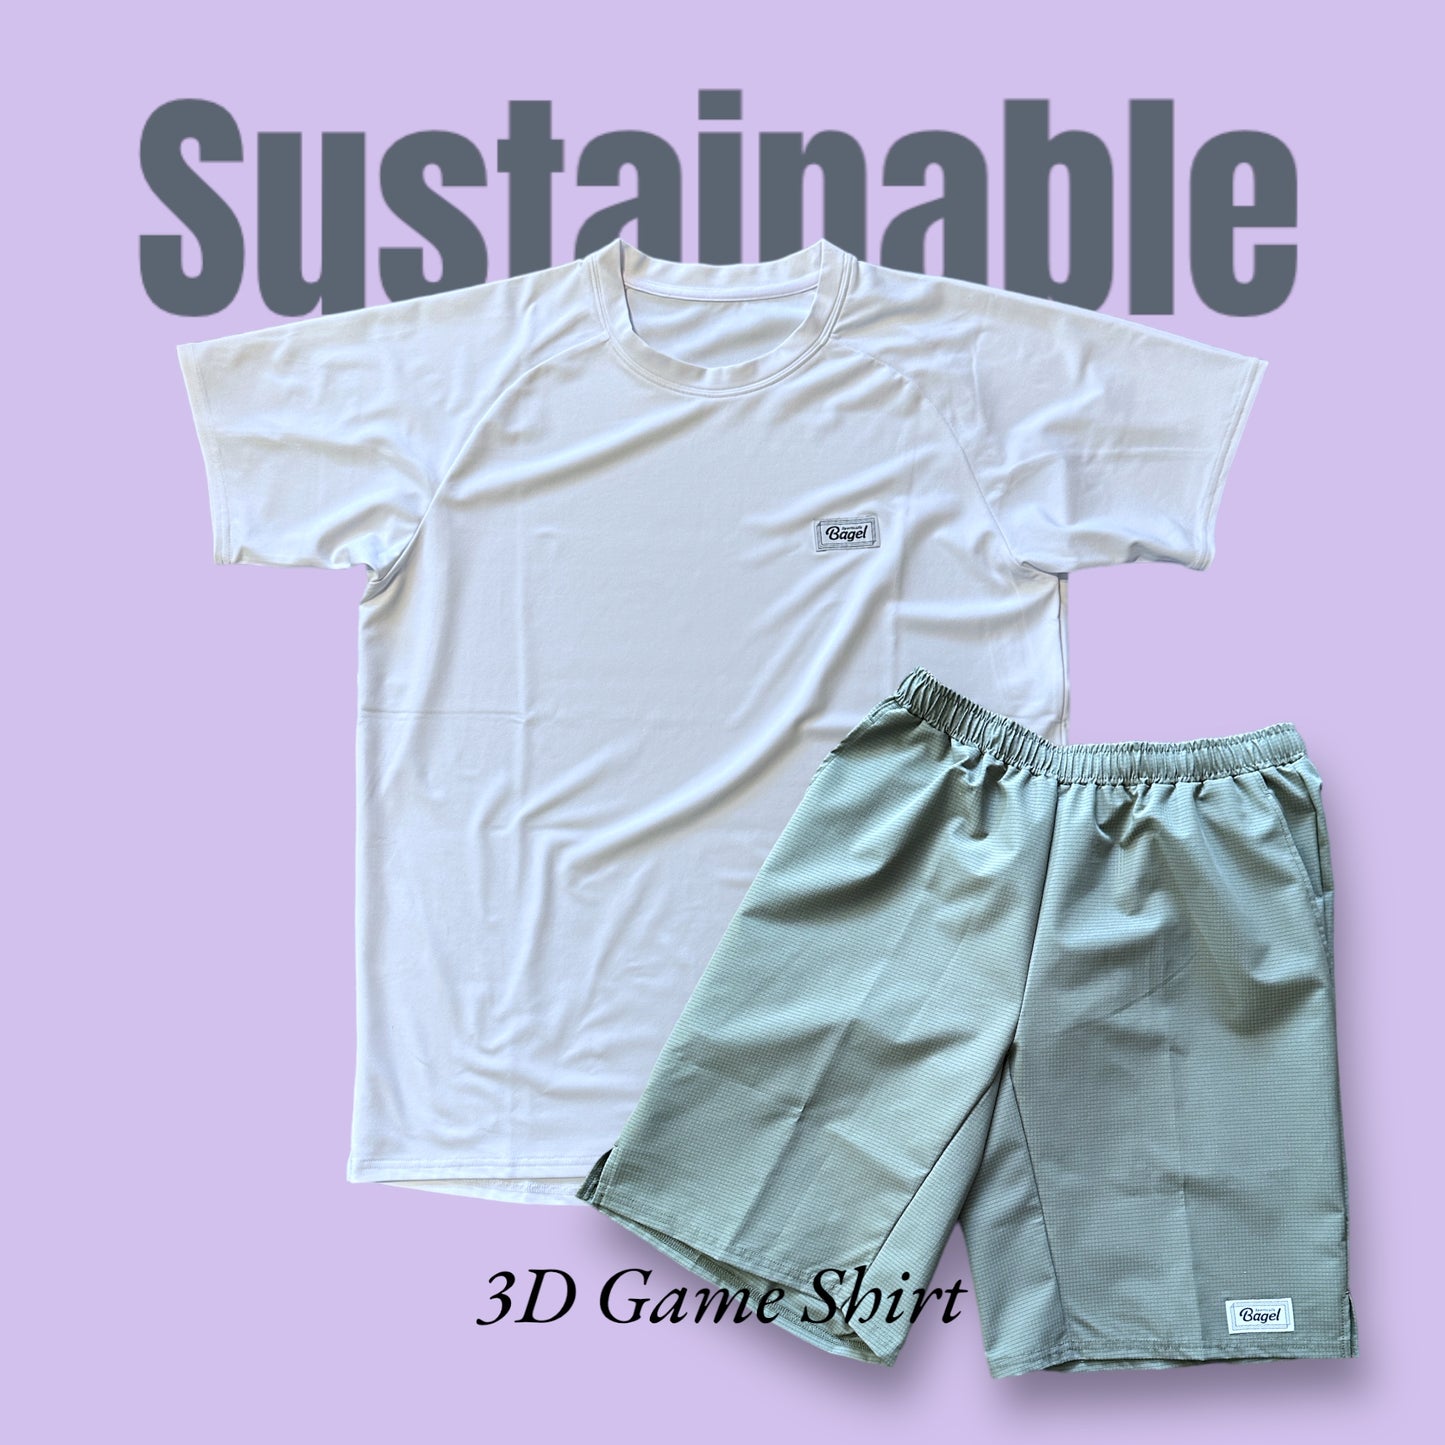 MENS Sustainable 3D Game Shirt White